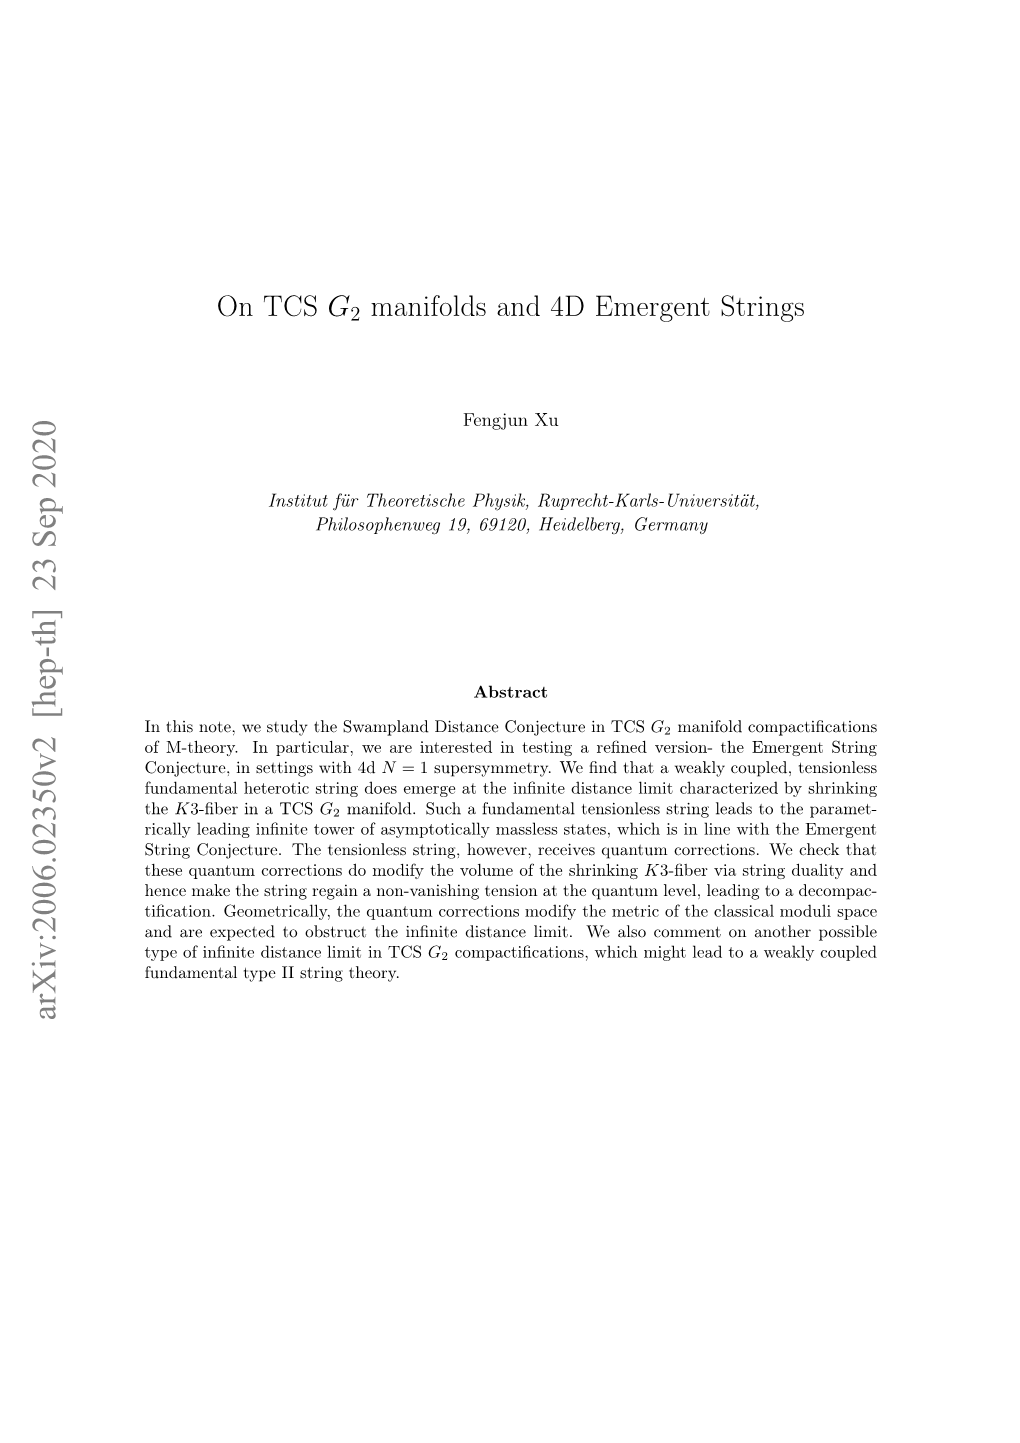 On TCS G2 Manifolds and 4D Emergent Strings